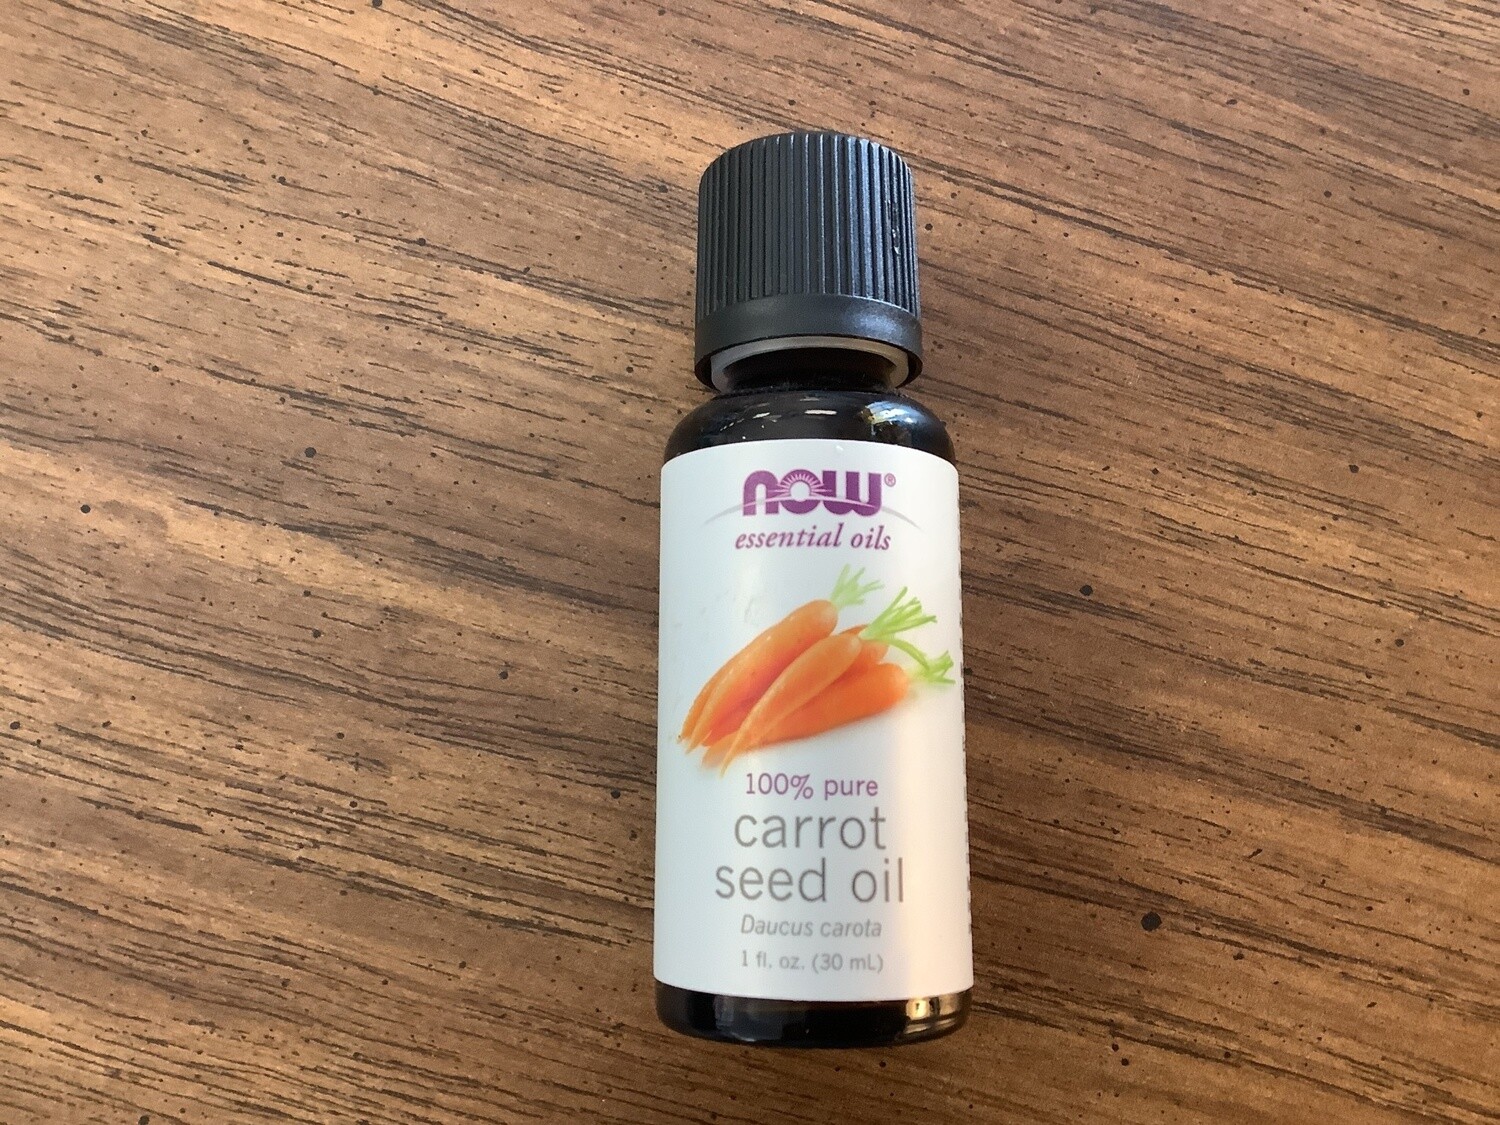 NOW CARROT SEED OIL 1 OZ